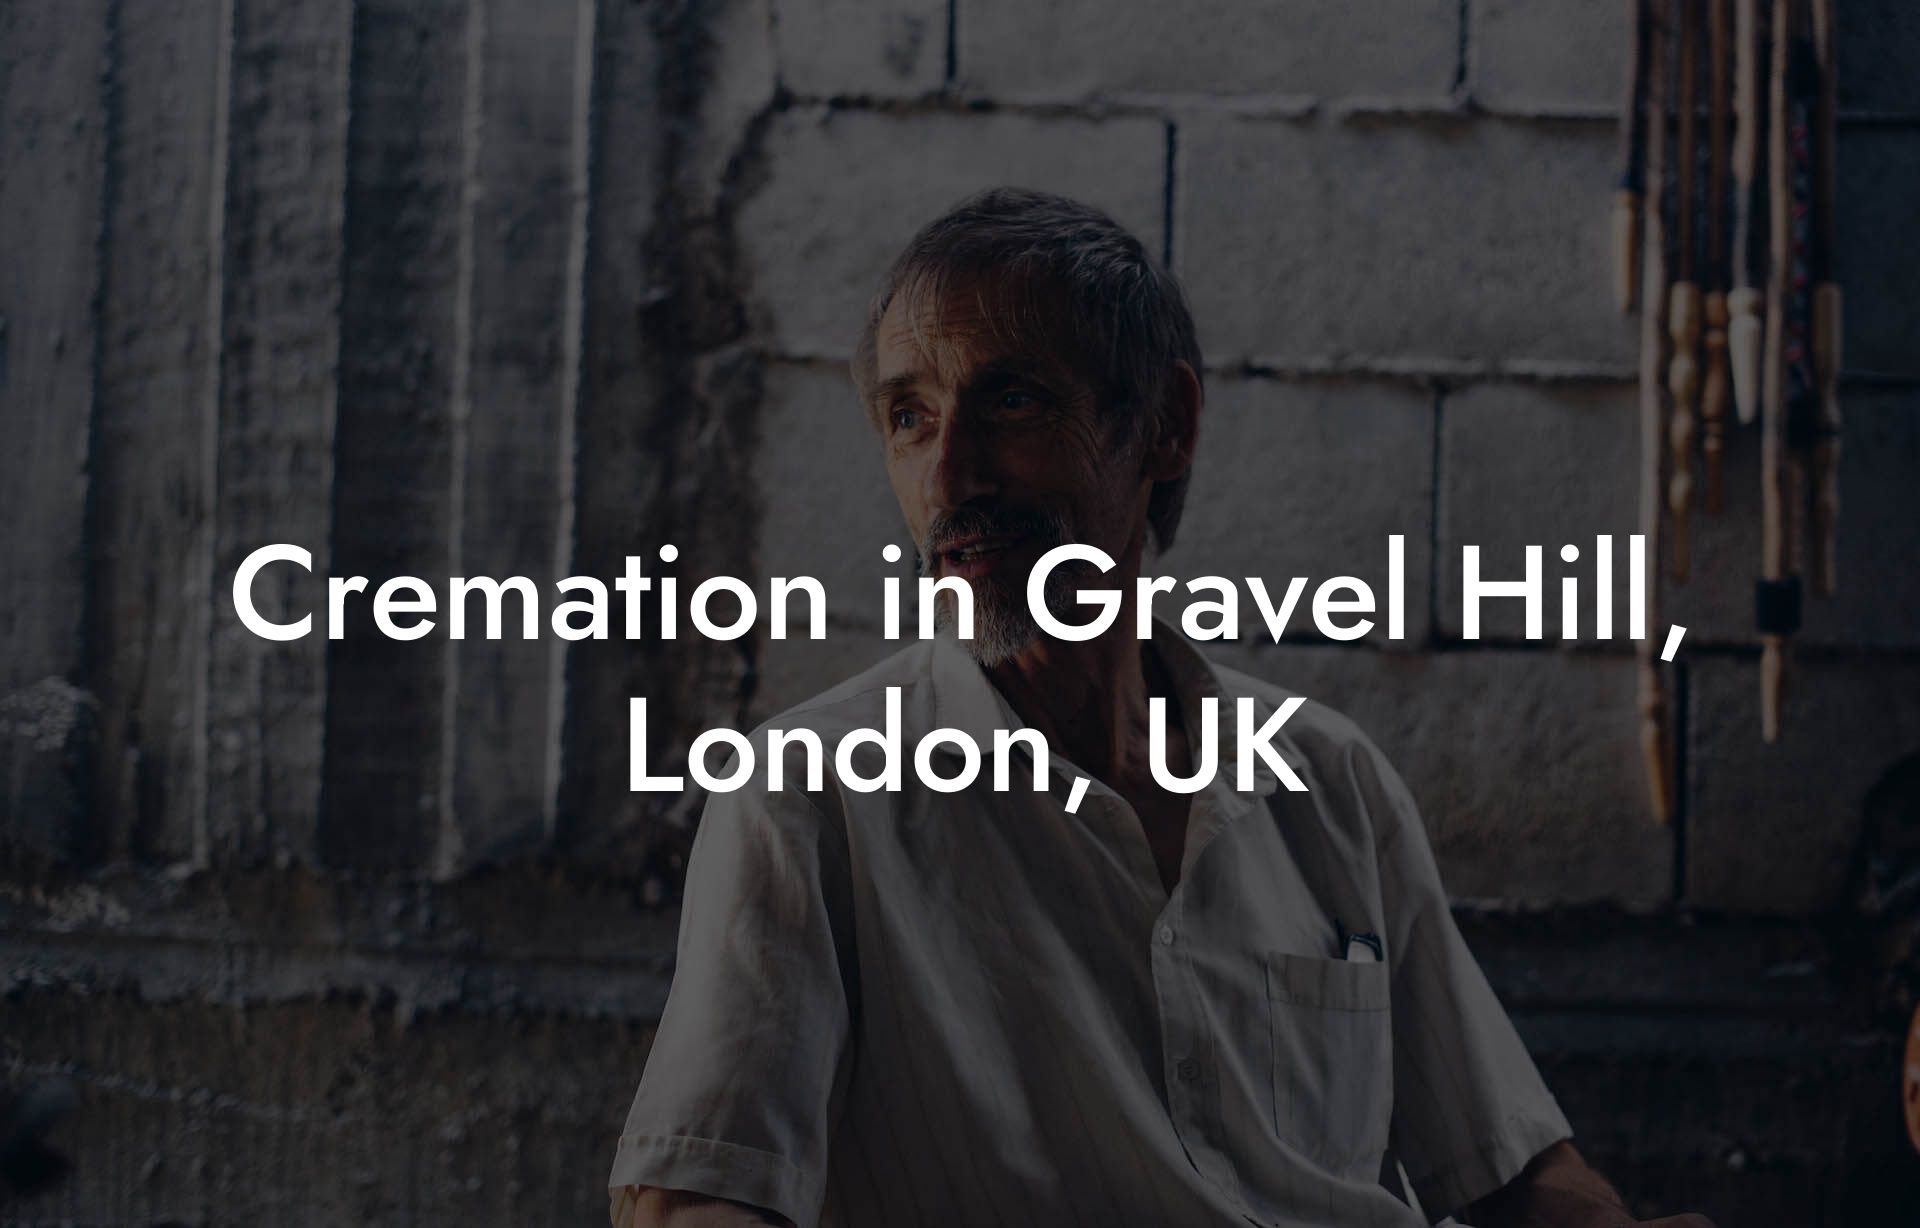 Cremation in Gravel Hill, London, UK